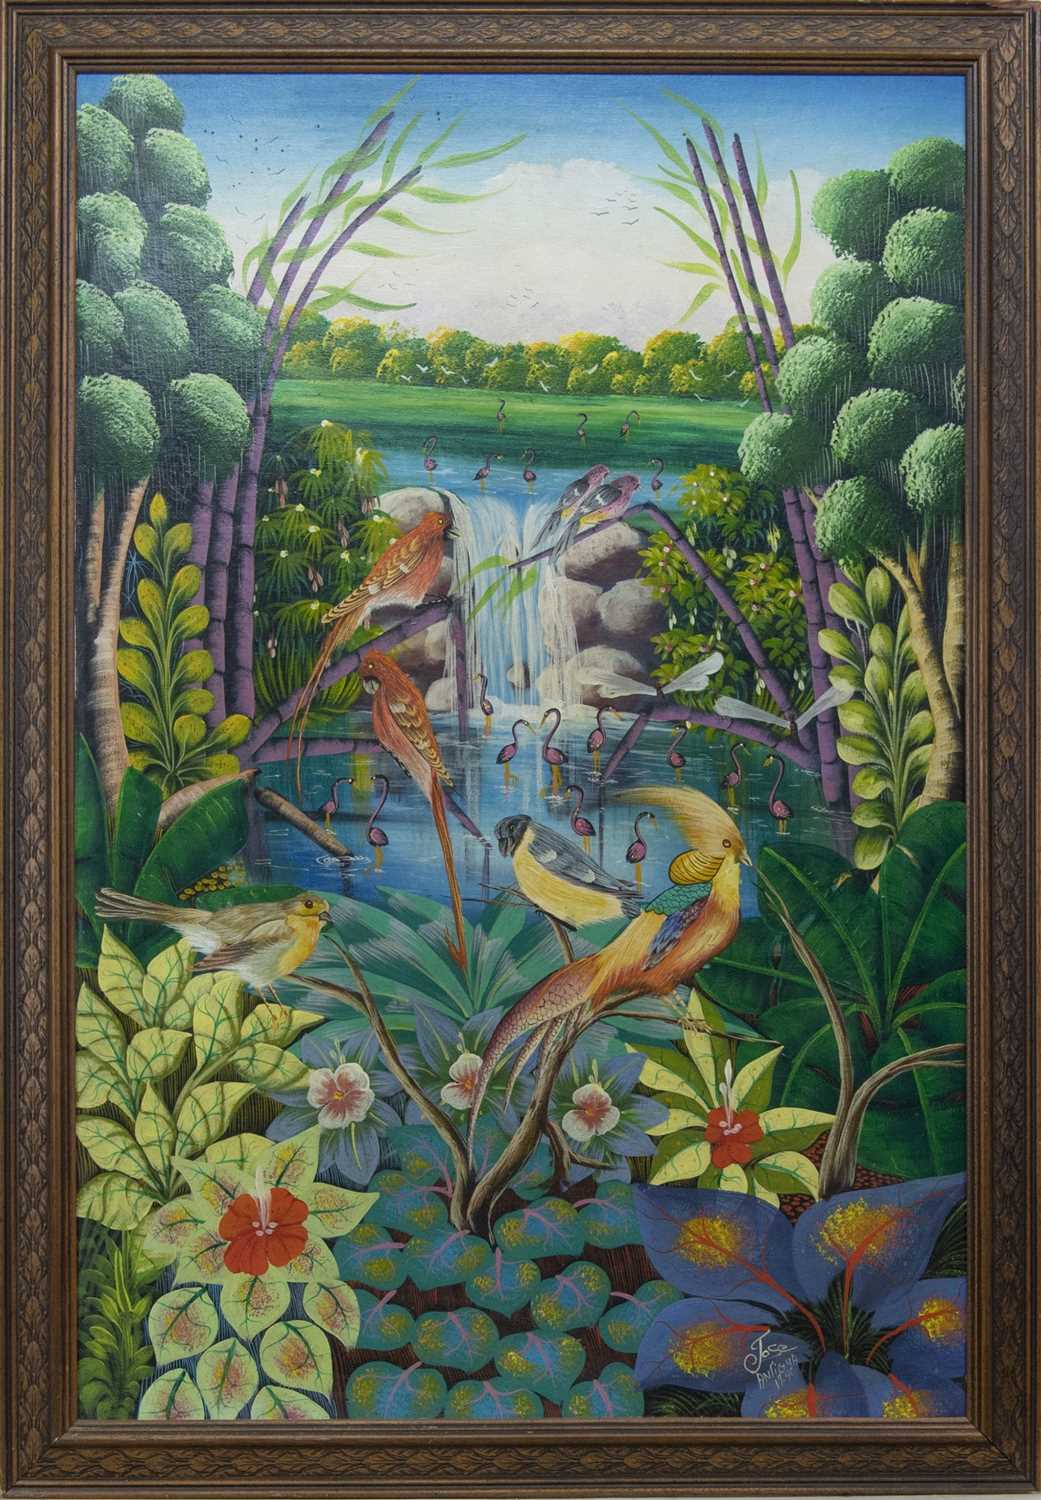 Lot 8 - EXOTIC BIRDS IN A STYLISED LANDSCAPE, AN OIL BY JOSE ANTIGUA